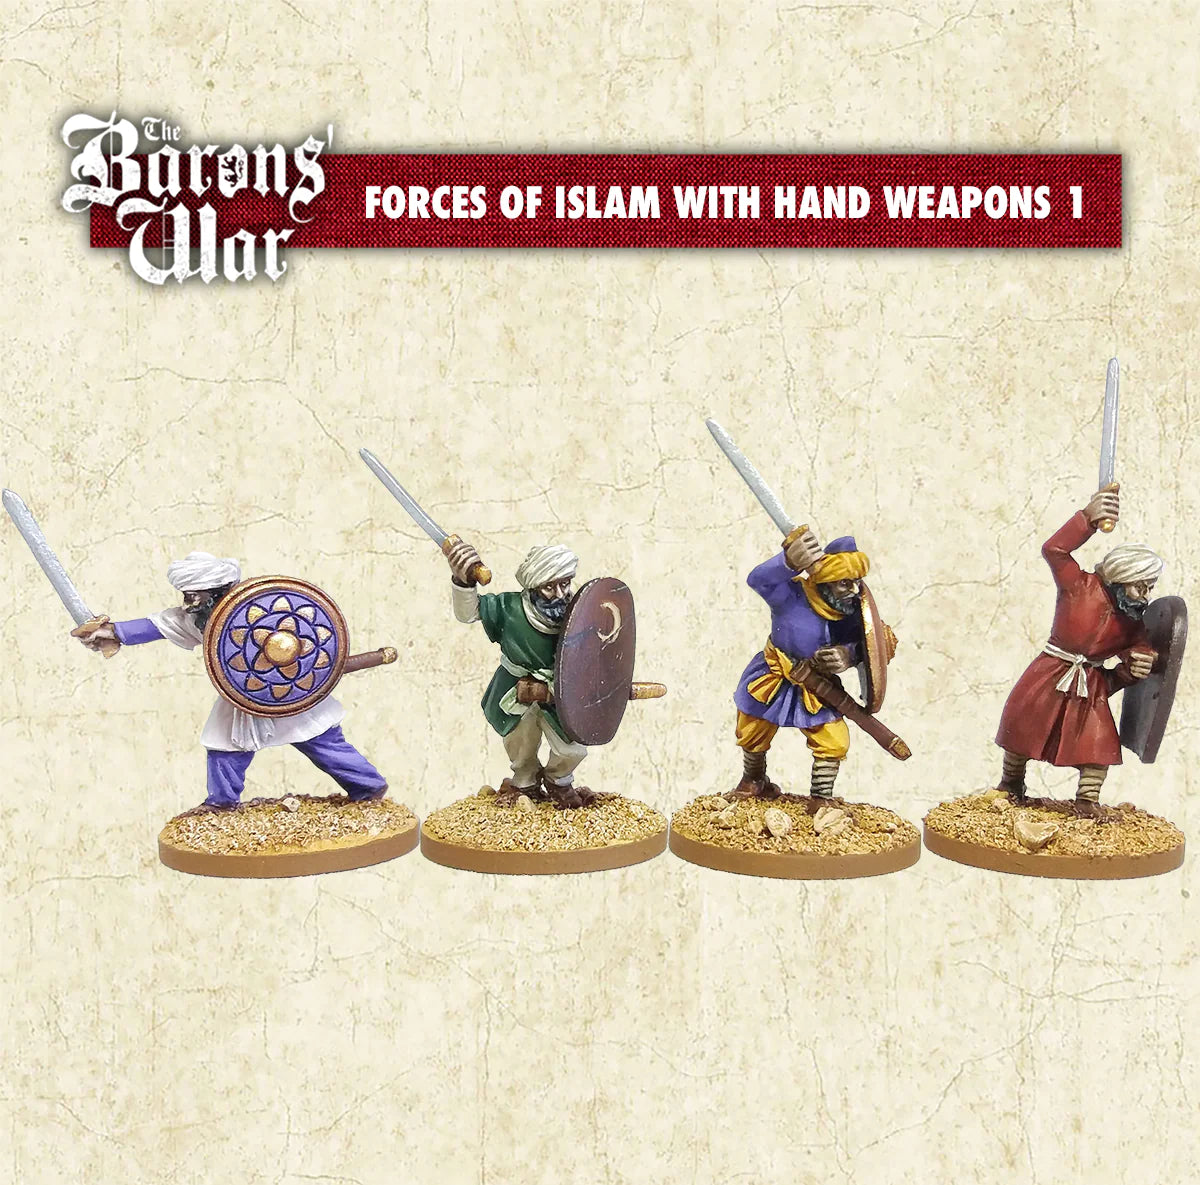 Forces of Islam with hand weapons 1: Barons War Outremer